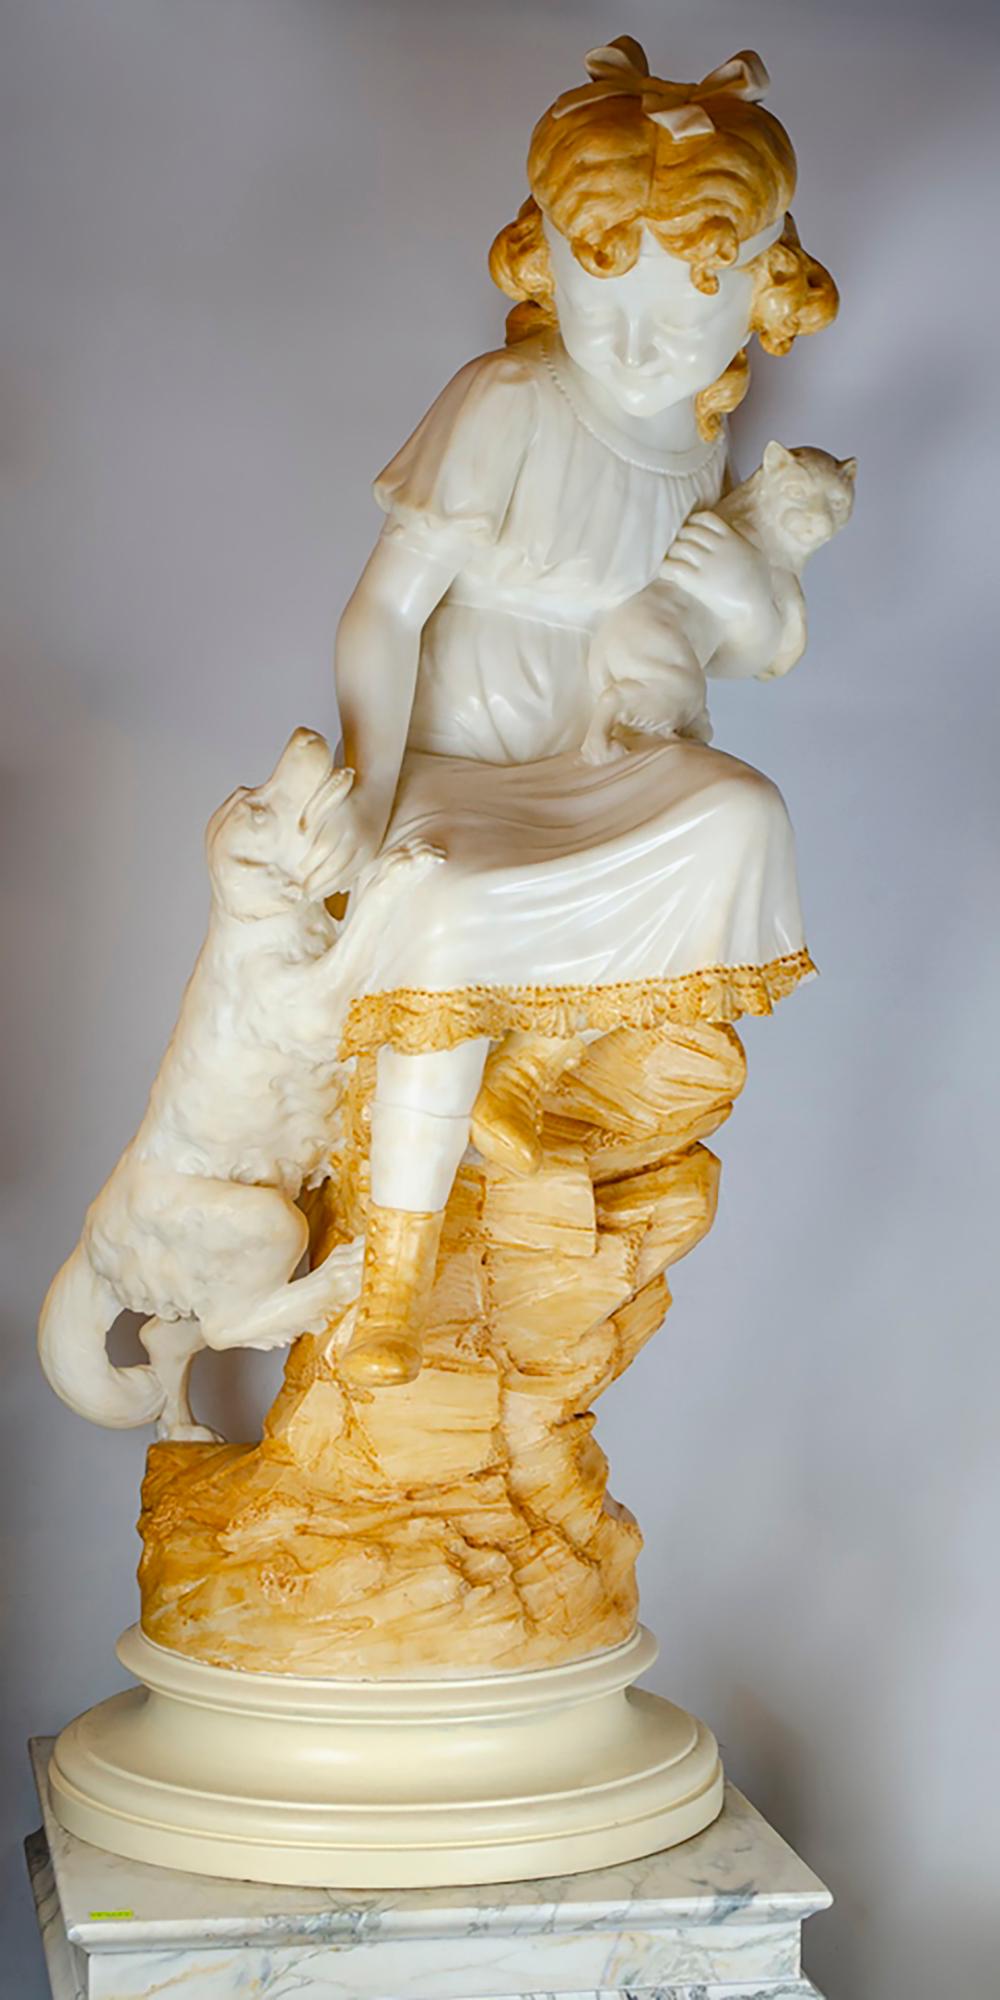 Girl sculpture with her two pets, a dog and a kitten in French Alabaster with color details
Measures:
Height: 100 centimeters
Diameter: 22 centimeters